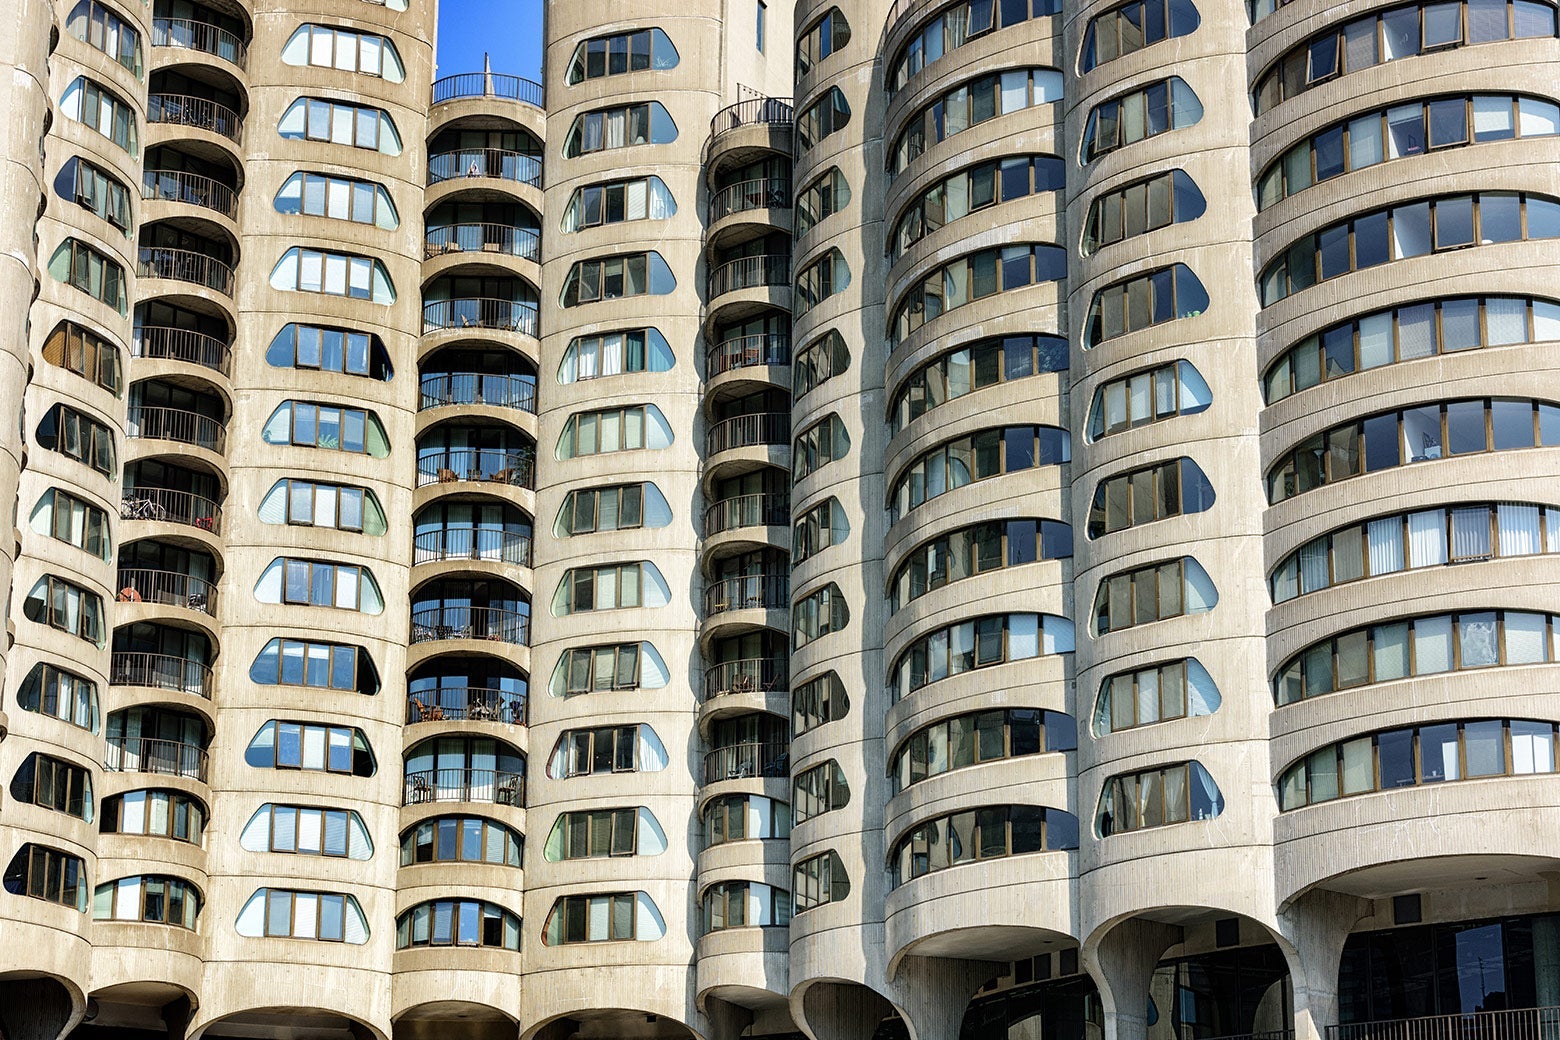 Tan-colored Brutalist apartment complex of cylindrical towers with window cutouts on each floor shaped like coin slots